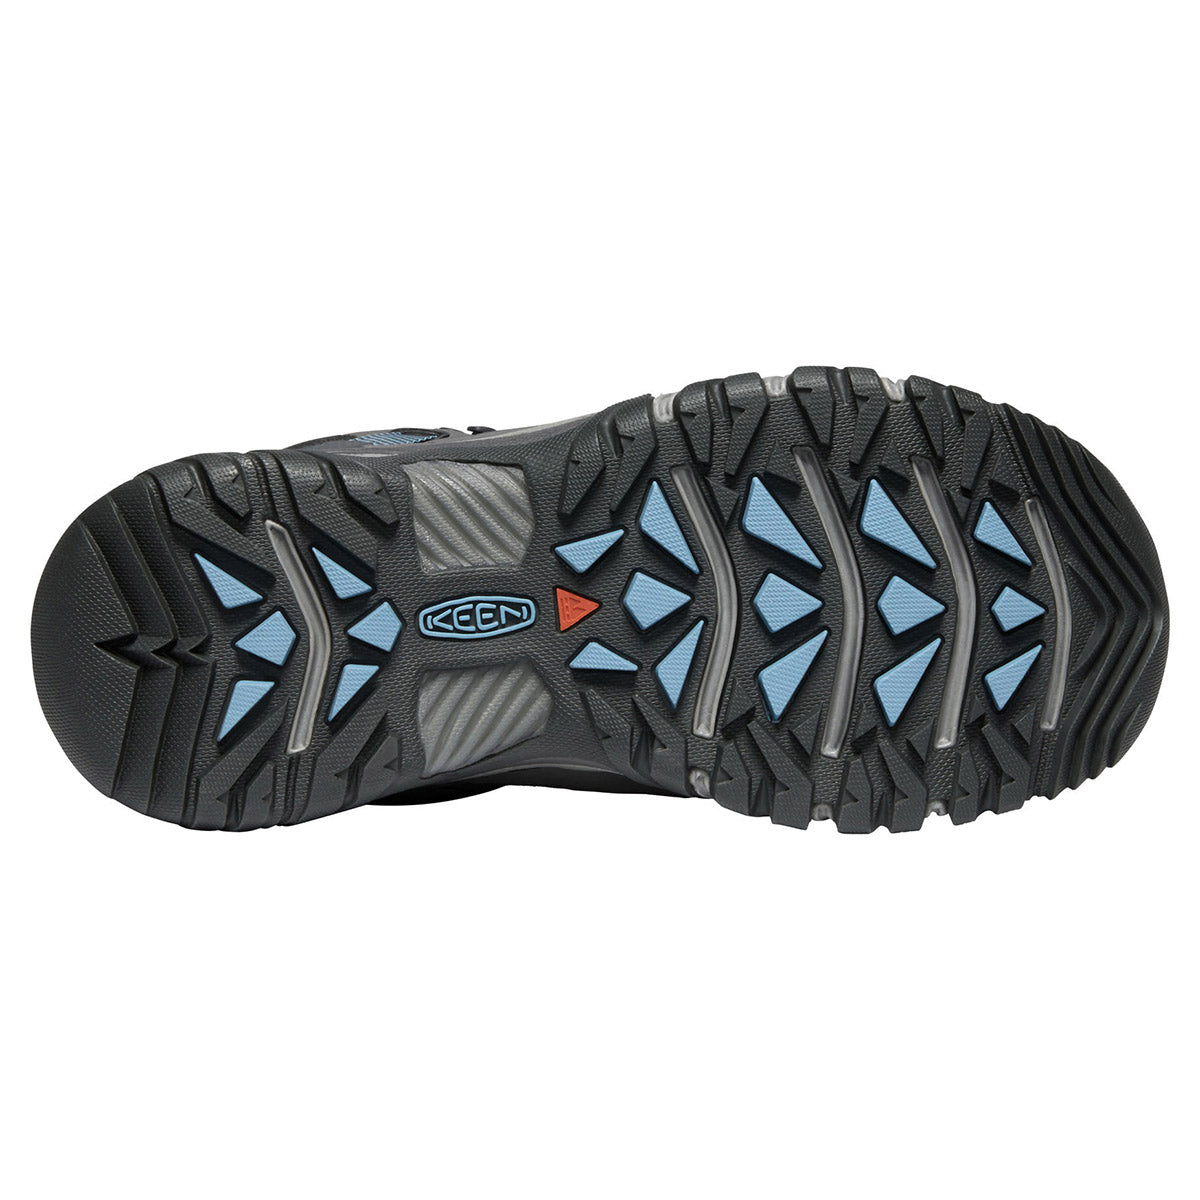 Sole of a Keen TARGHEE III MID WATERPROOF MAGNET/ATLANTIC BLUE - WOMENS rubber outsole on a hiking boot showing detailed tread pattern in gray and blue with the brand logo in the center.